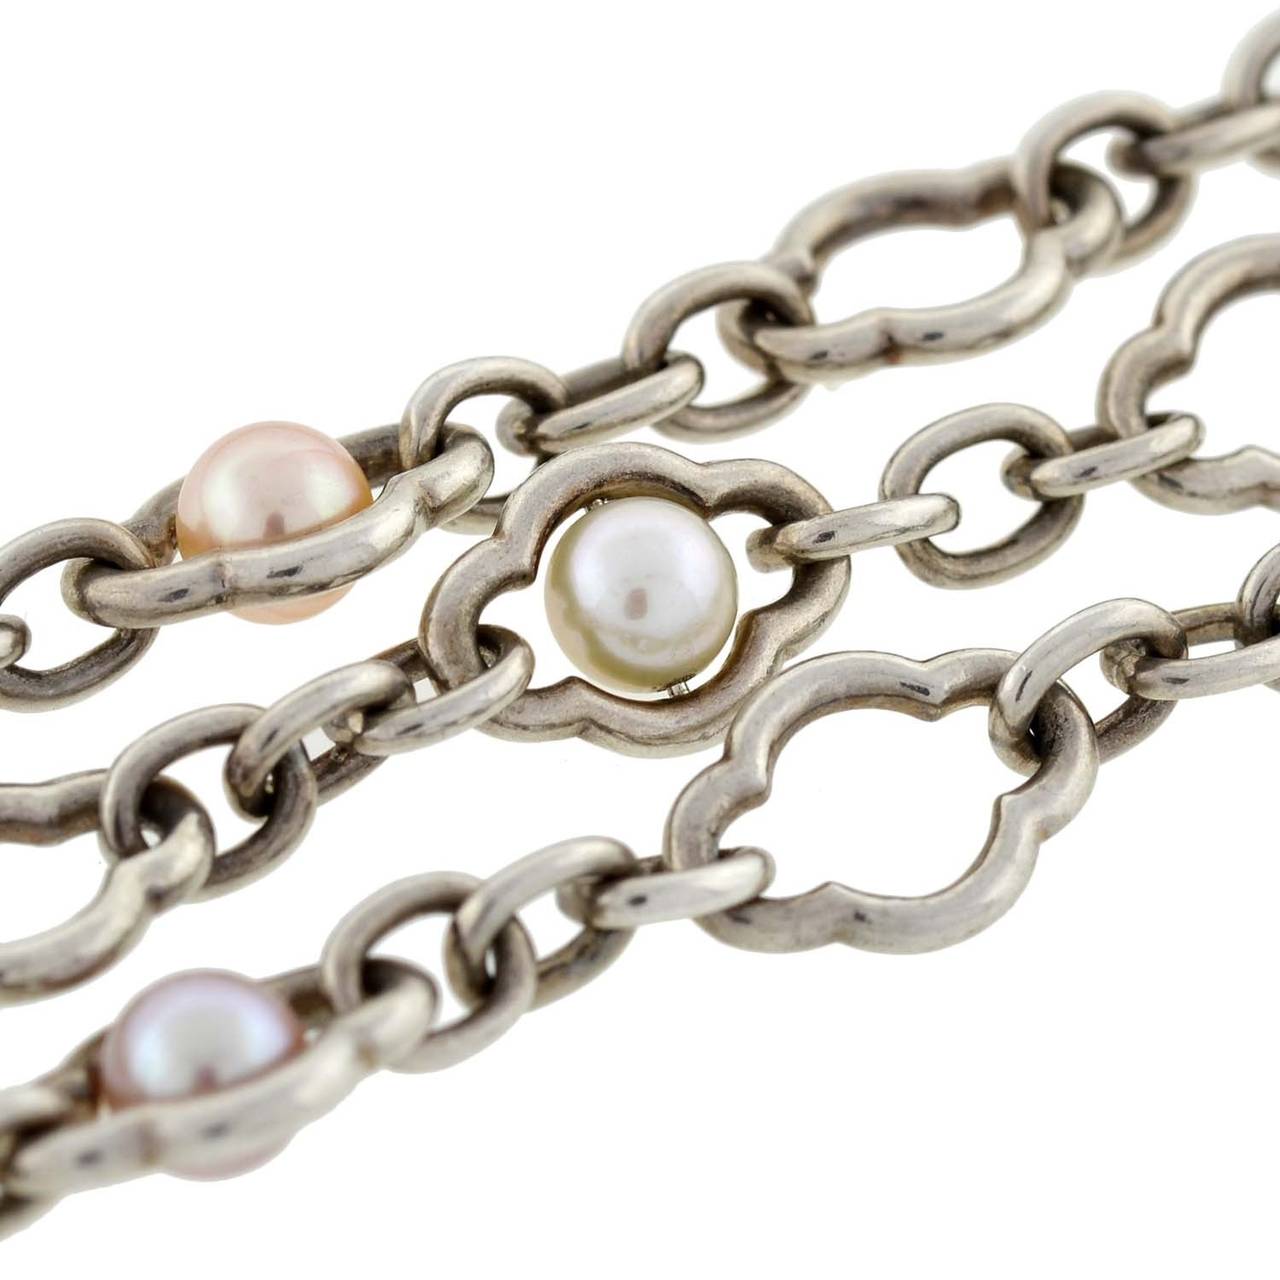 Women's Charles Krypell Fresh Water 80 Inch Pearl Chain Necklace